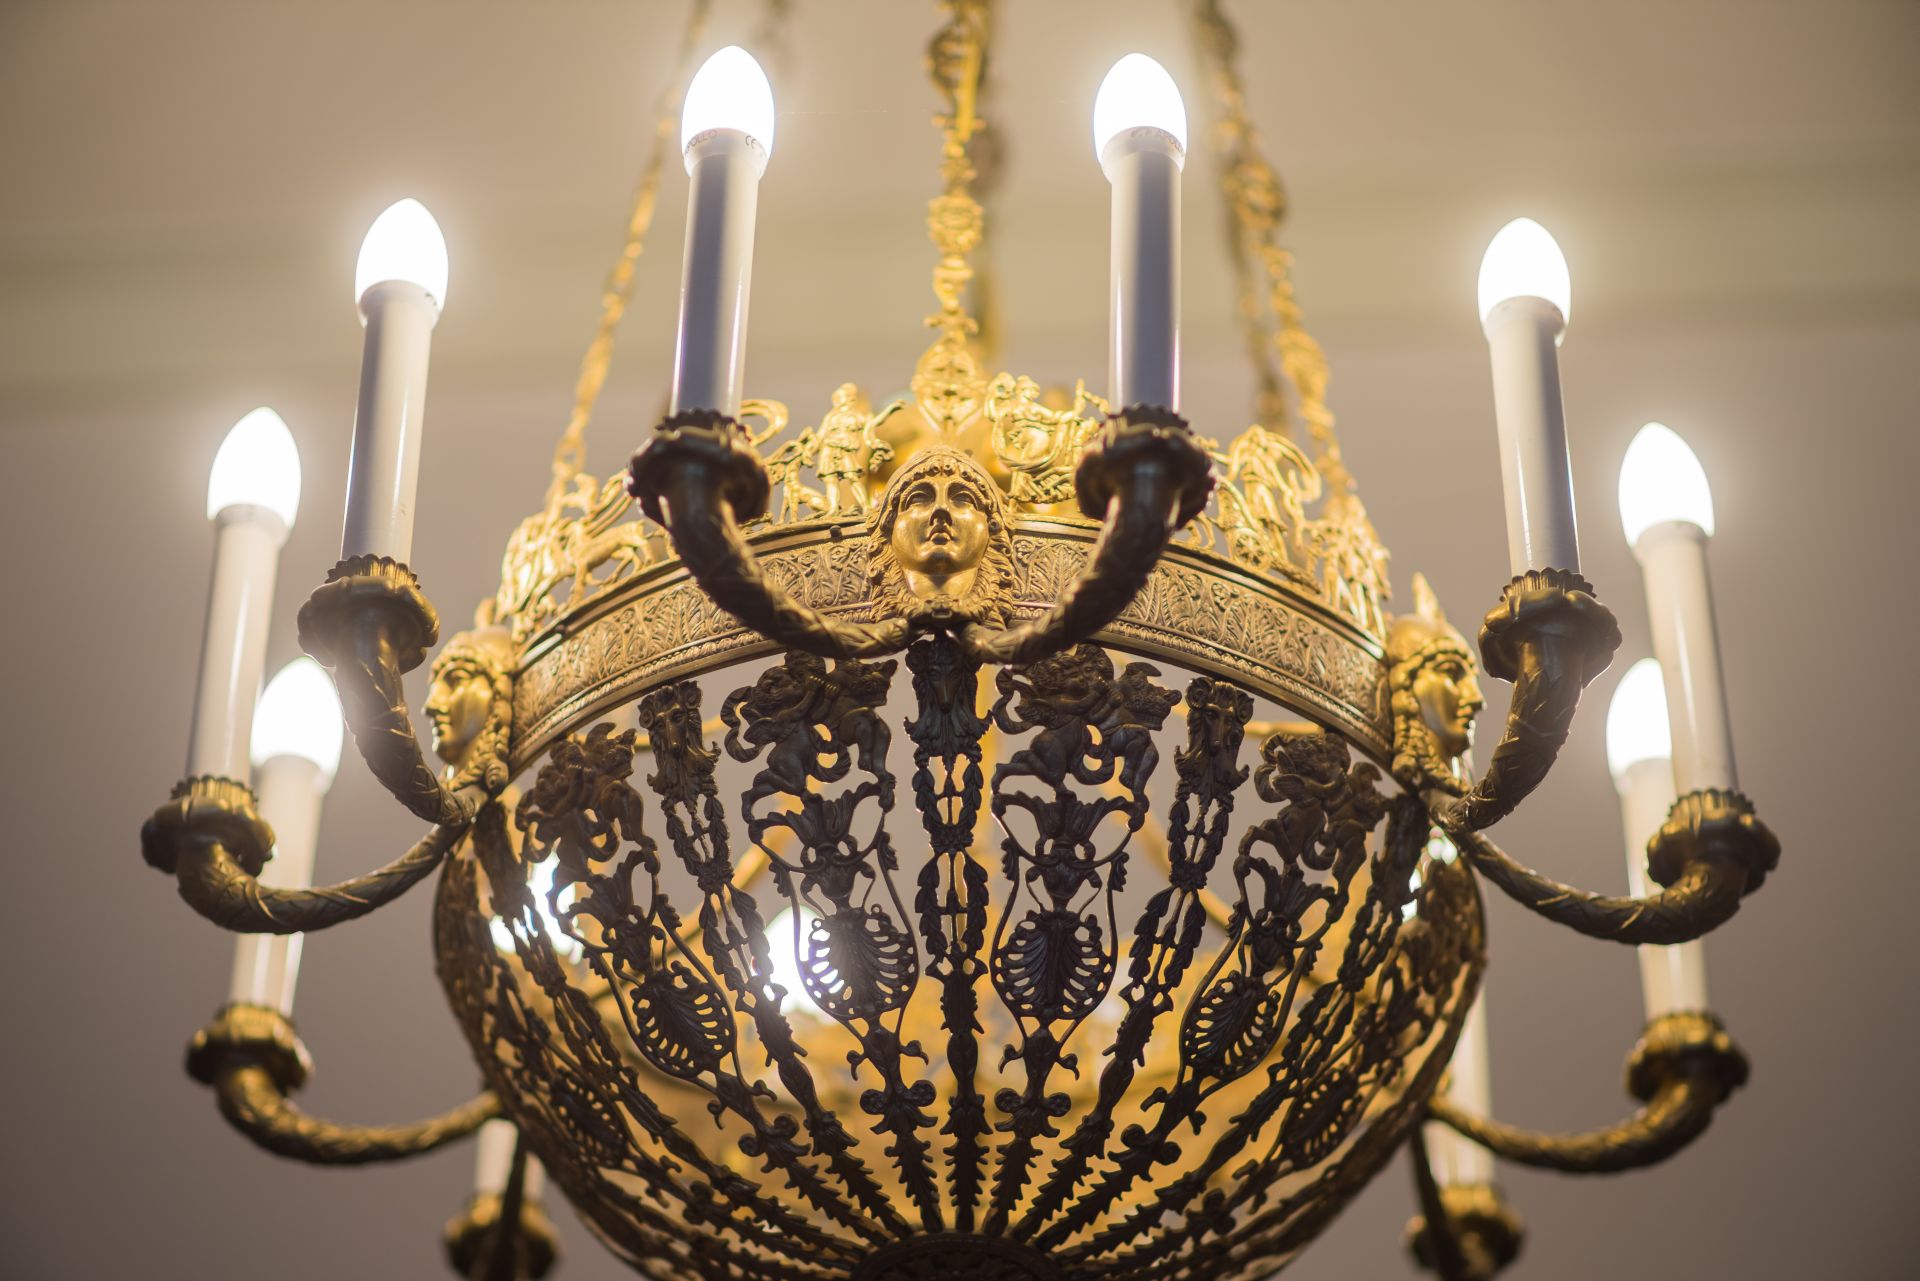 Fragment of chandelier, 1800–1829, Archdiocese of Vilnius. Photo by Povilas Jarmala, 2017